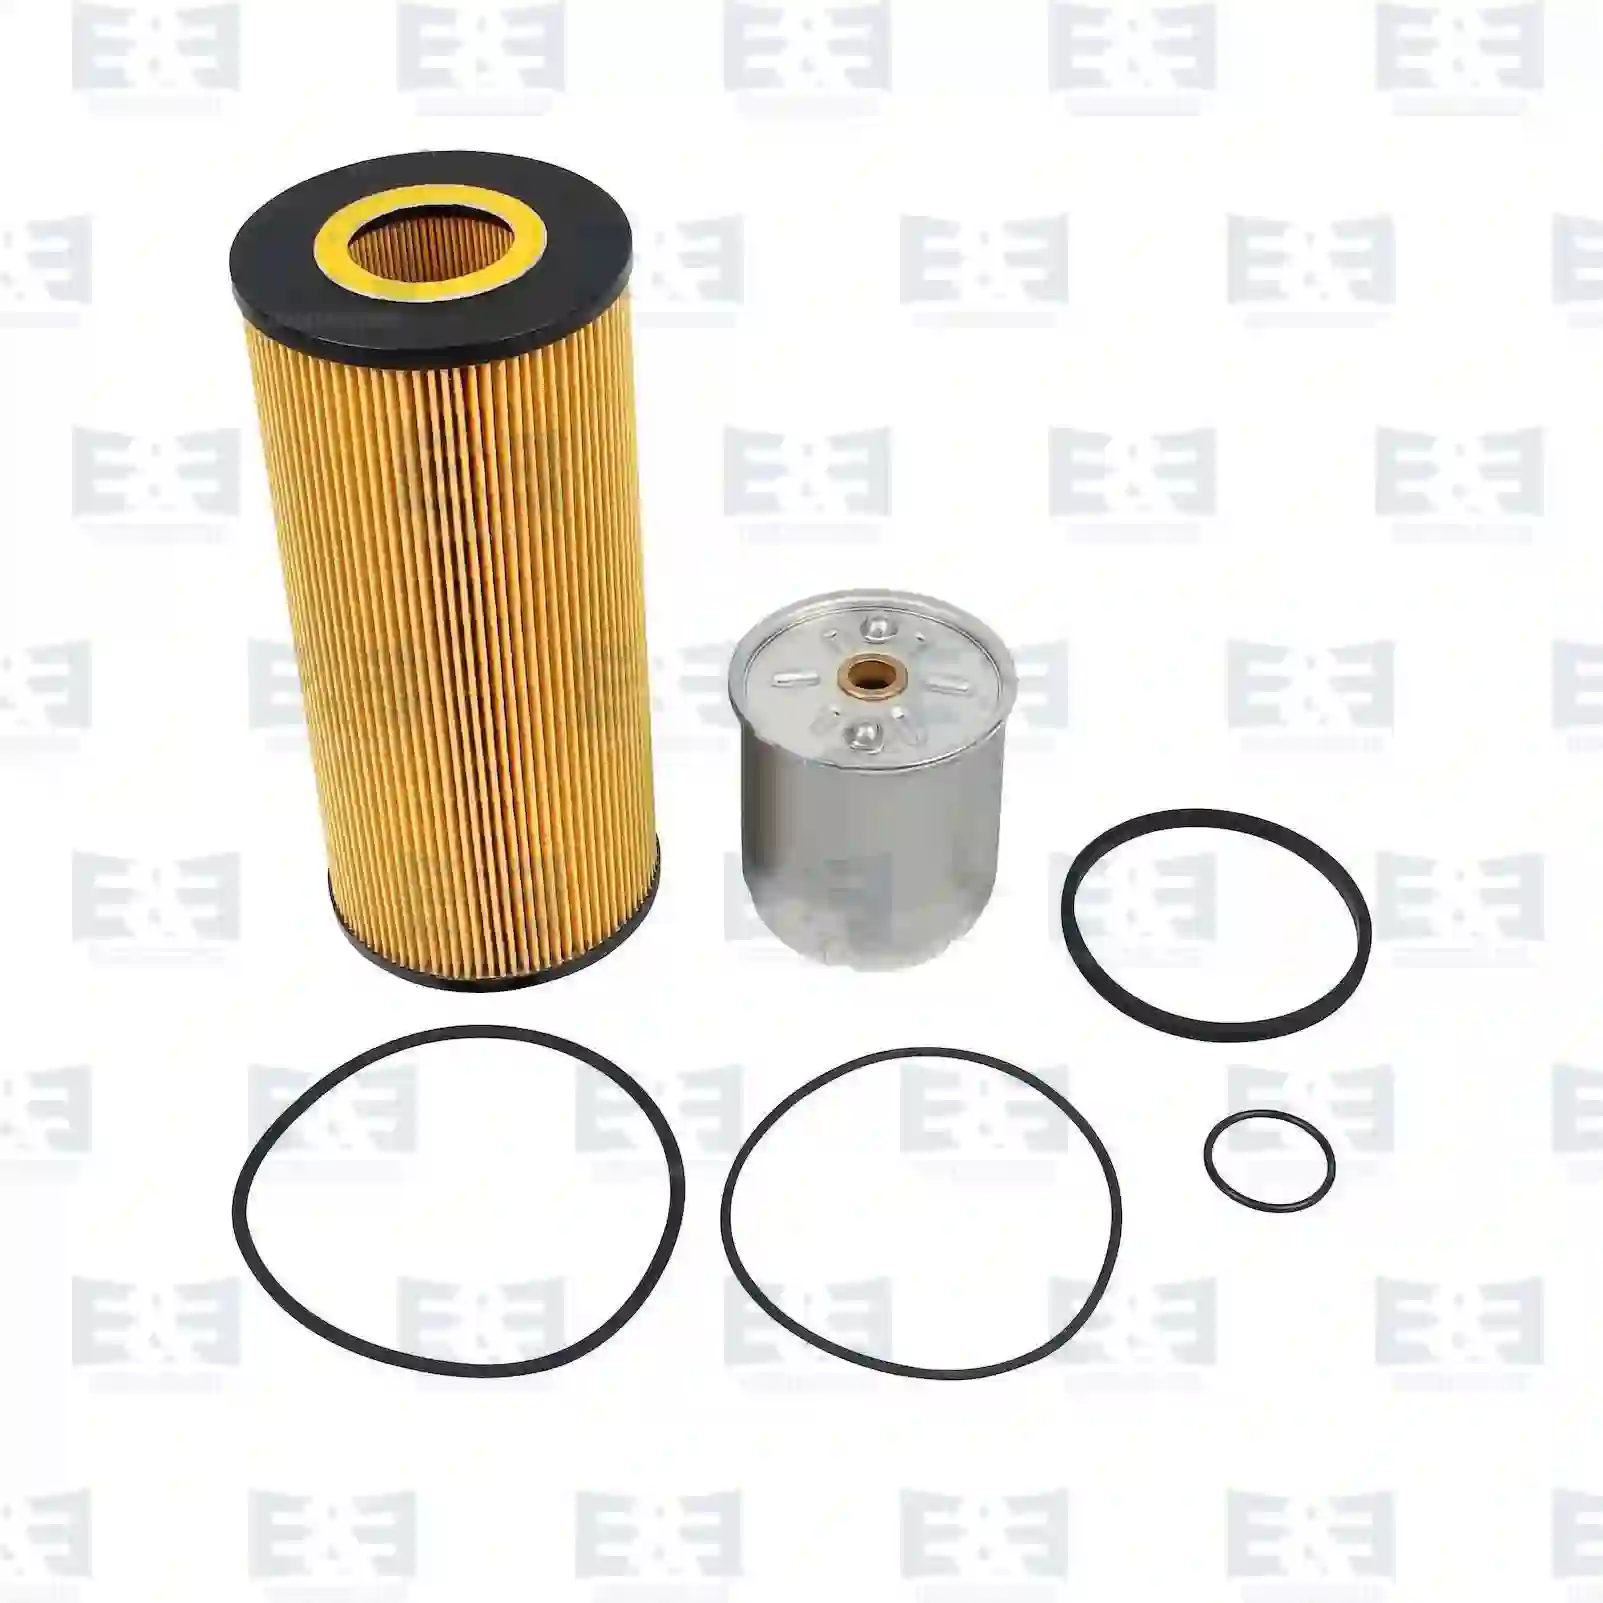  Oil filter kit, for biodiesel-engines || E&E Truck Spare Parts | Truck Spare Parts, Auotomotive Spare Parts